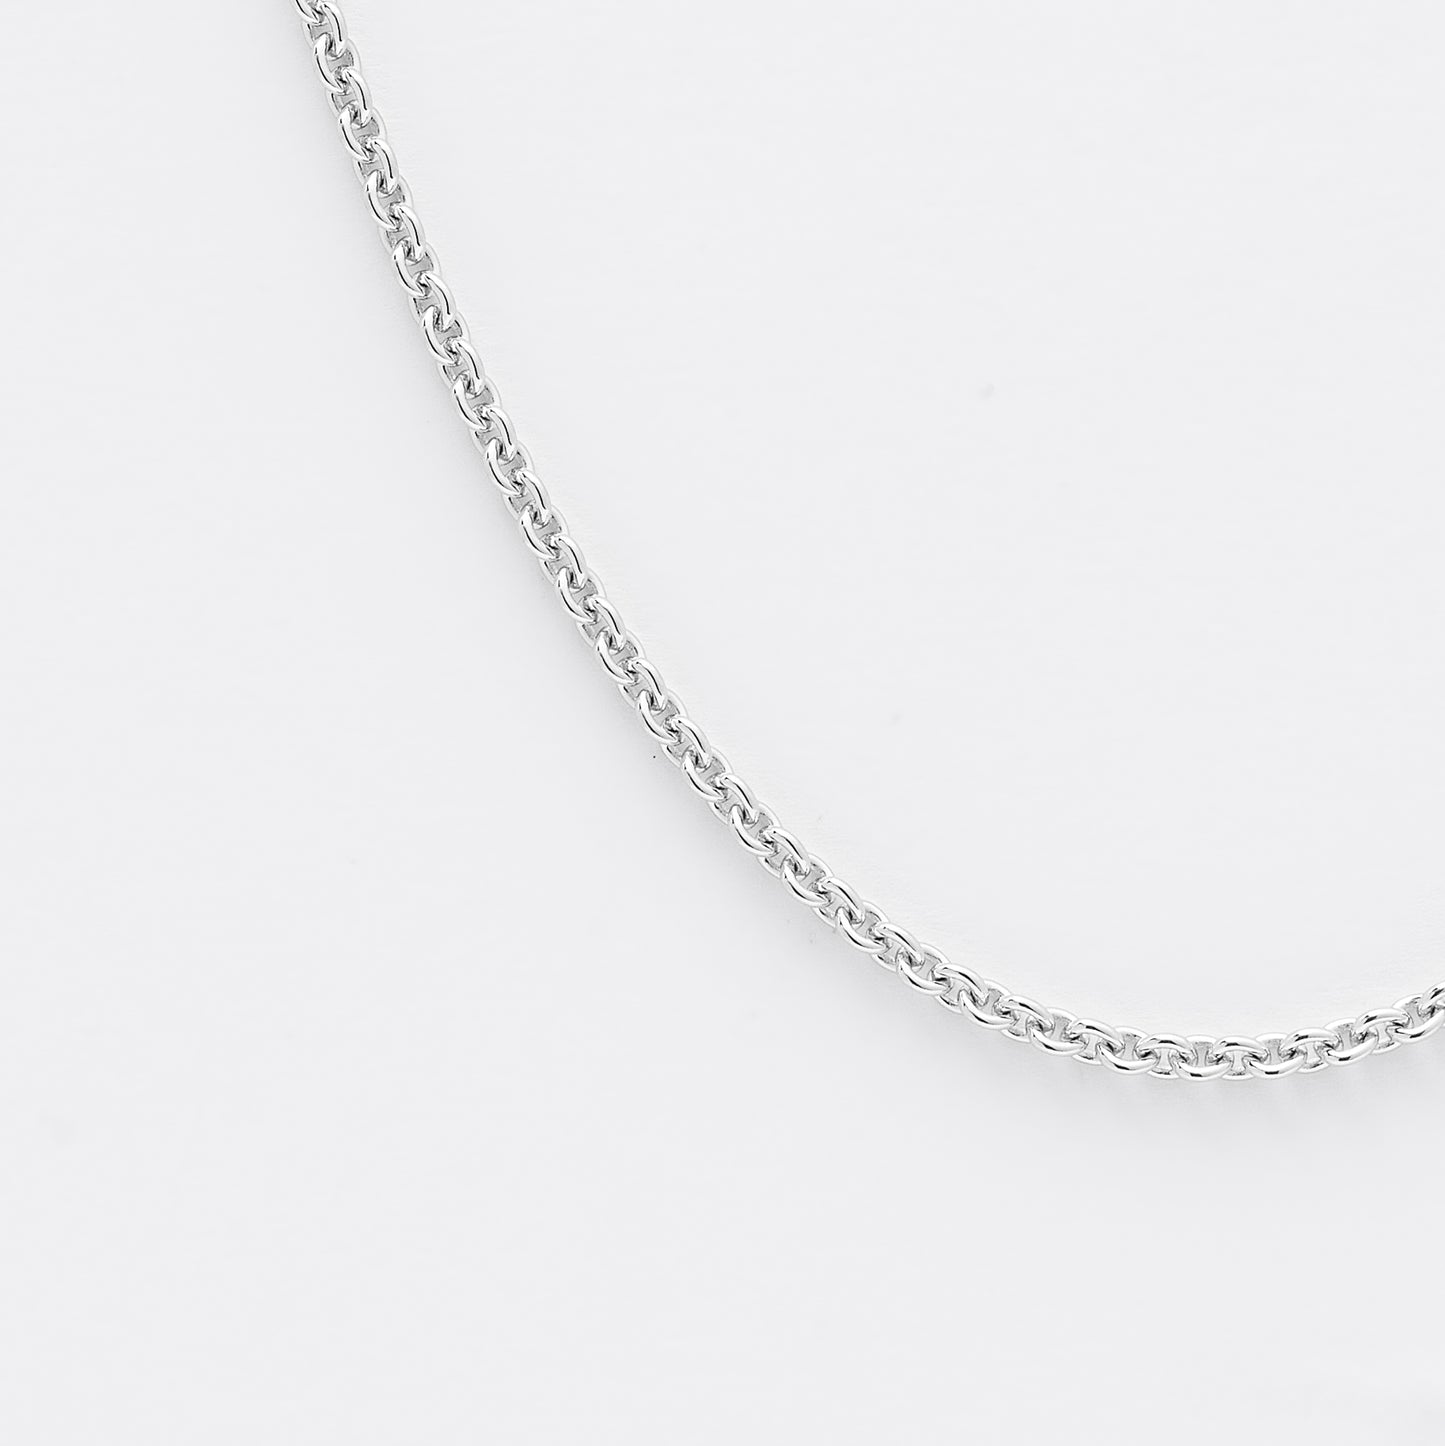 Sterling Silver 65cm Trace Chain 2.7mm